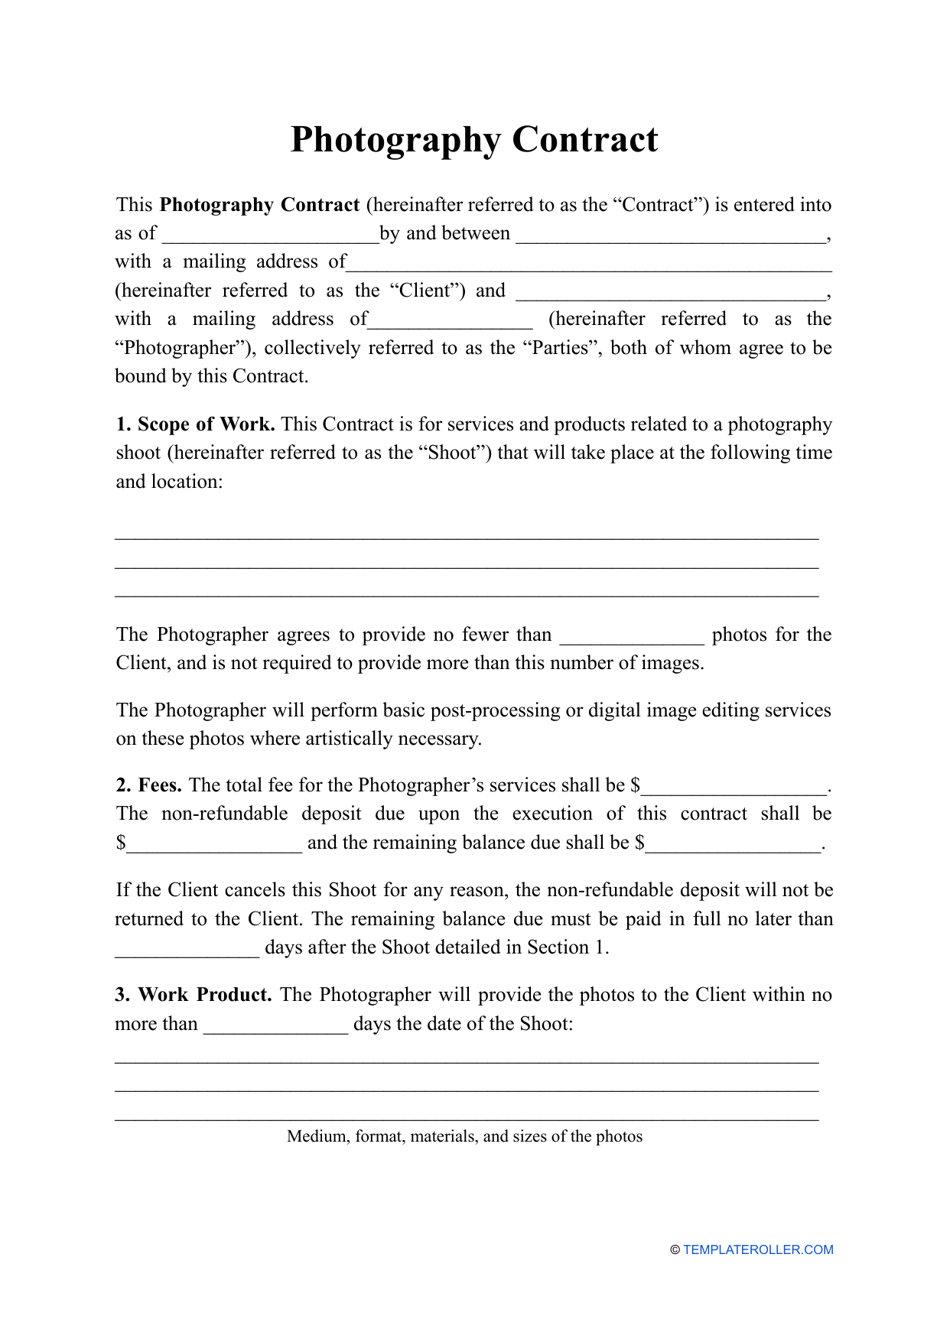 Photography Contract Template Fill Out, Sign Online and Download PDF